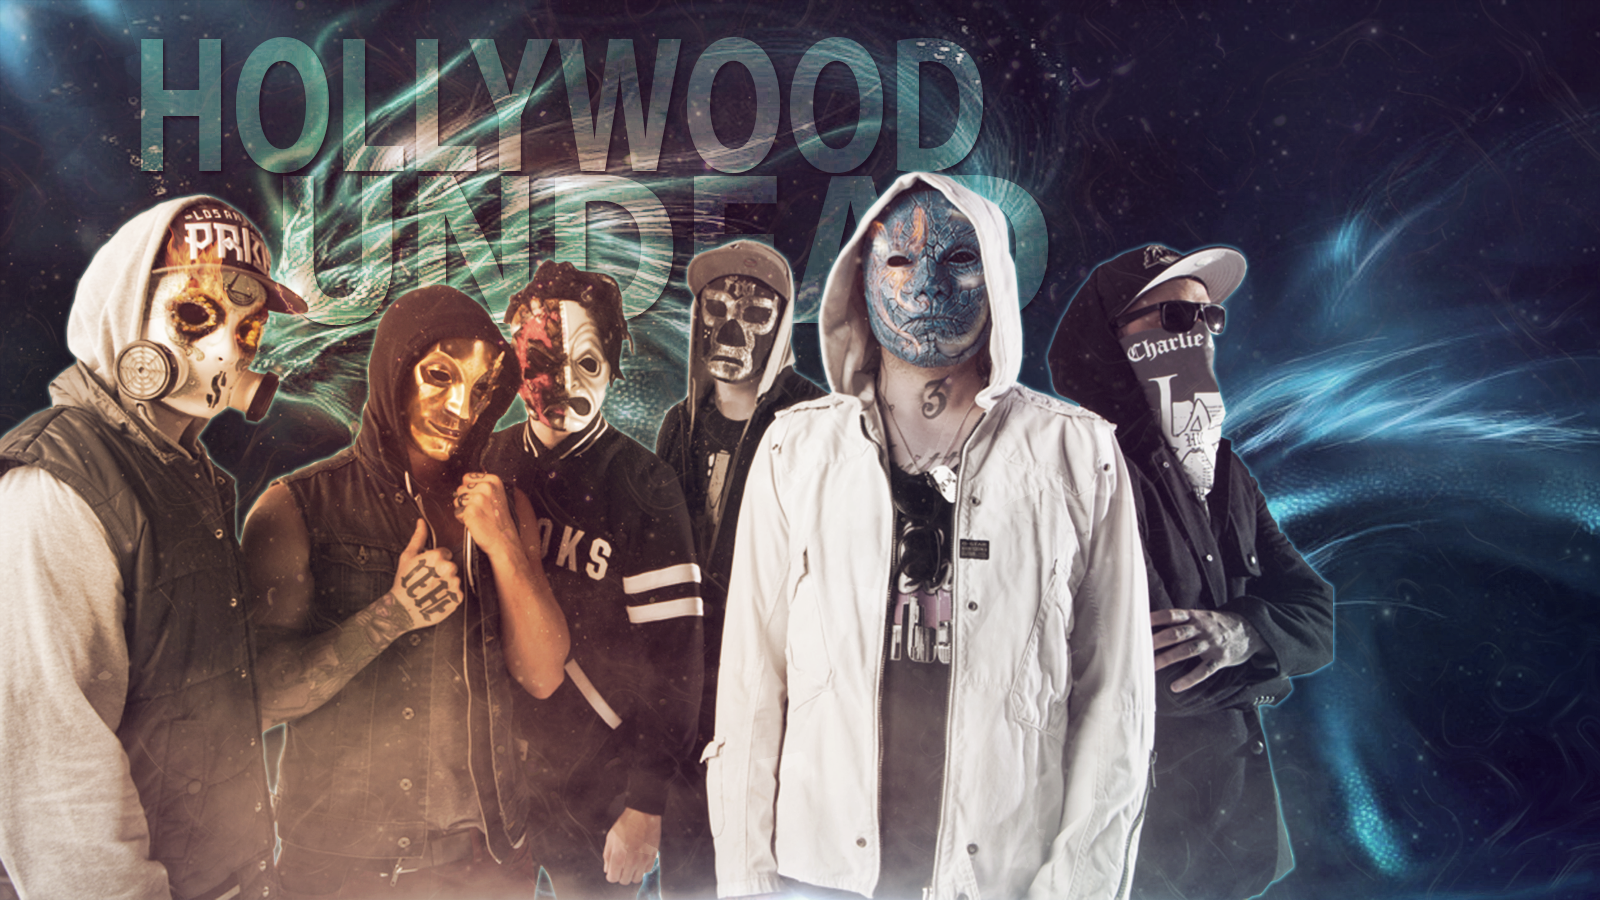 Hollywood Undead Wallpaper by RaizeDesigns on